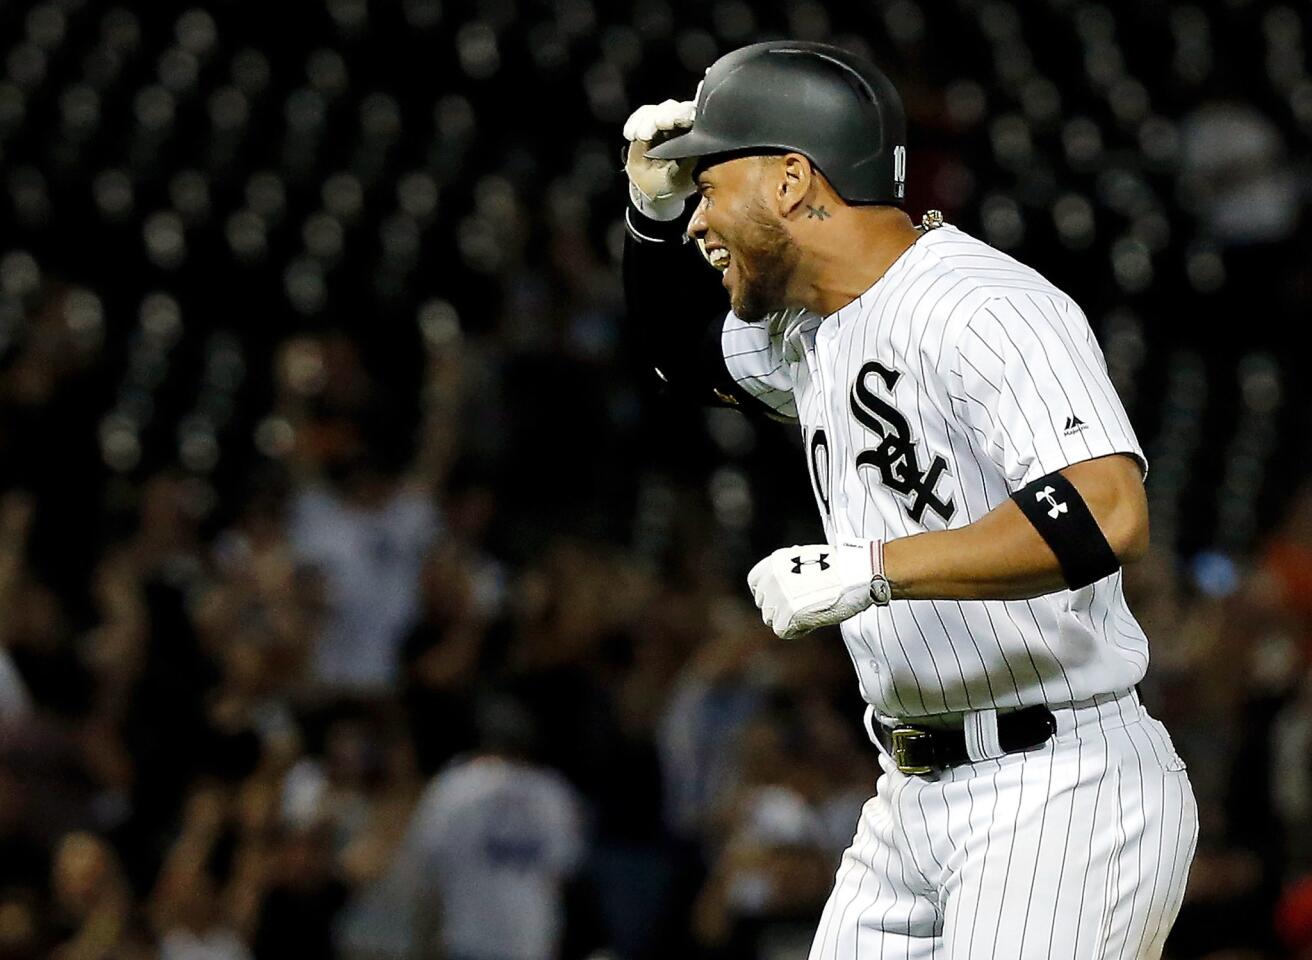 Yoan Moncada reacts after hitting a walkoff RBI single against the Astros during the eleventh inning at Guaranteed Rate Field on Aug. 10, 2017.